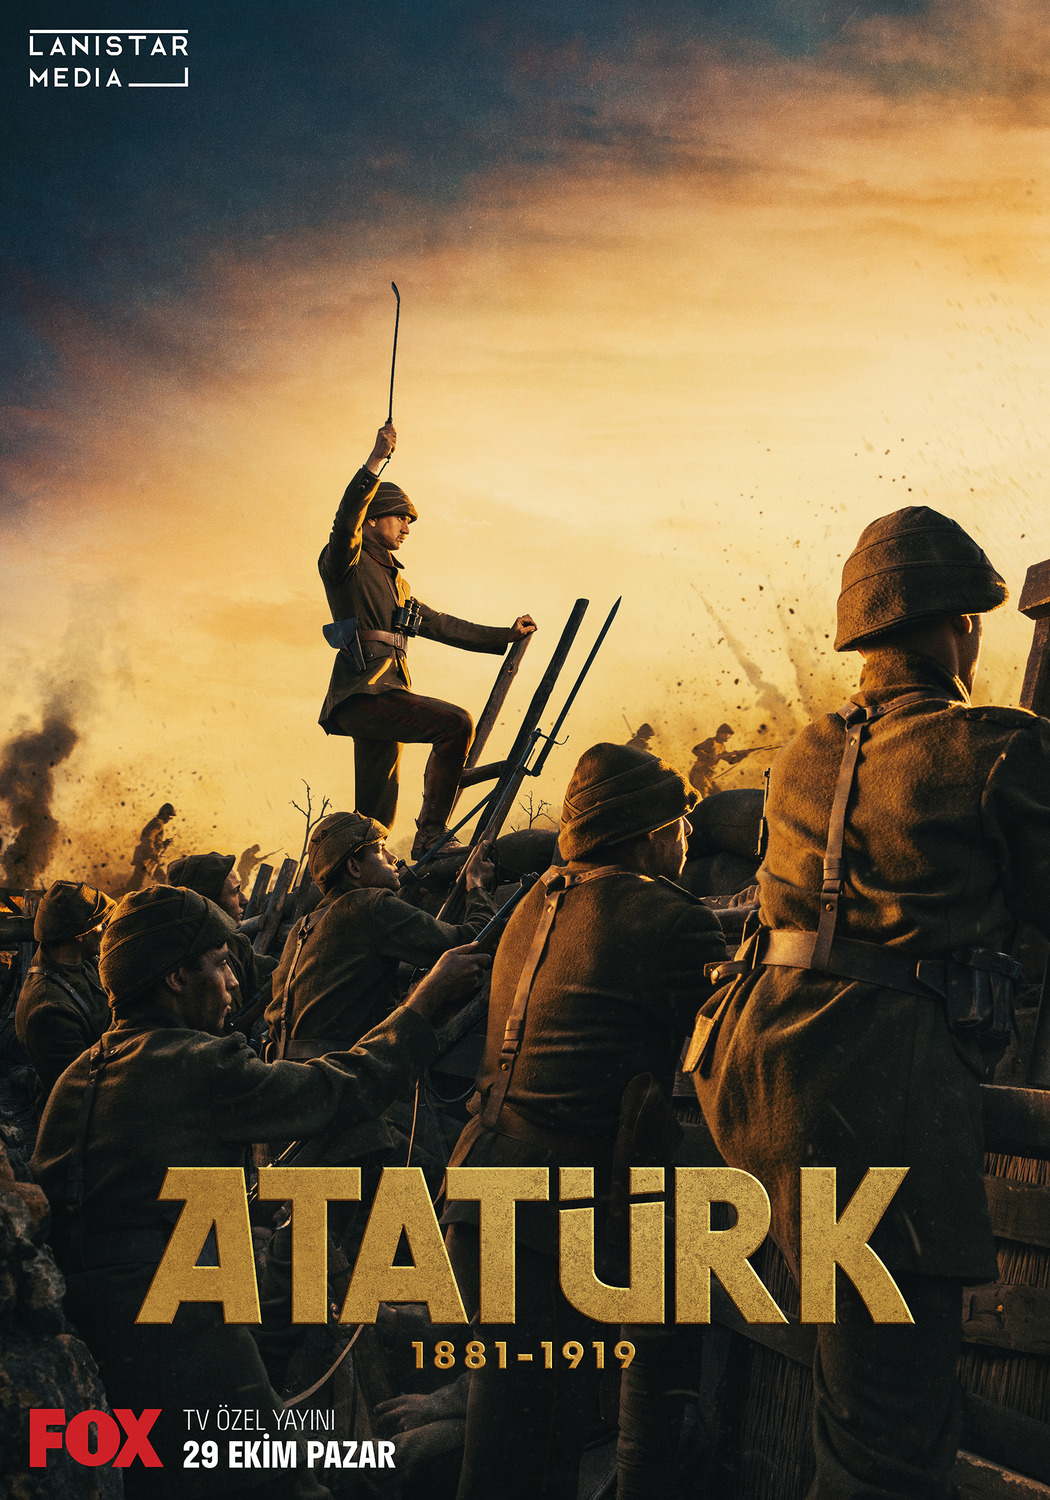 Extra Large TV Poster Image for Atatürk 1881 - 1919 (#1 of 11)